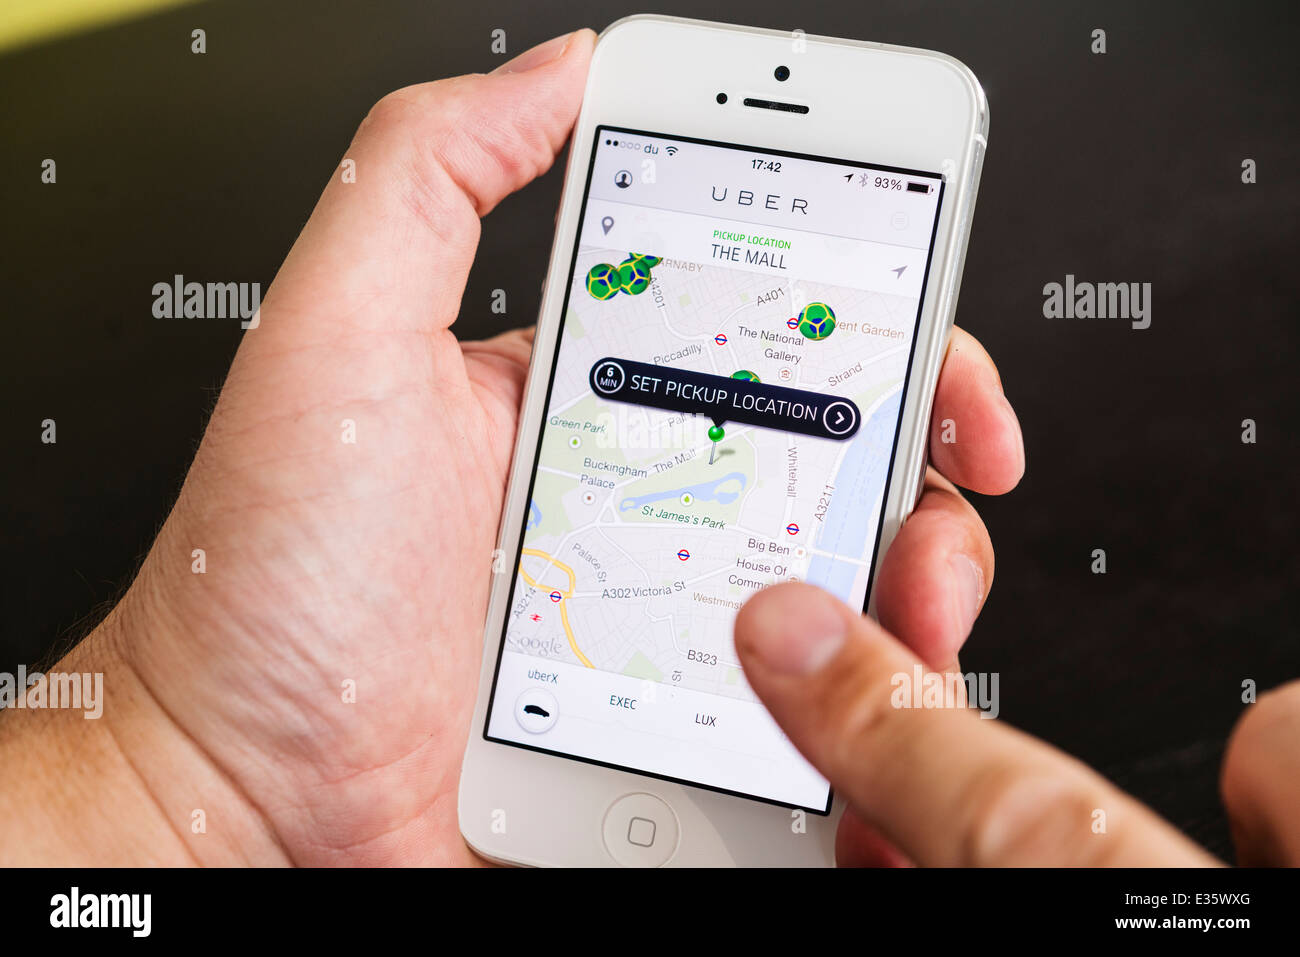 Detail of Uber taxi booking app showing pick-up points in London on iphone smart phone Stock Photo